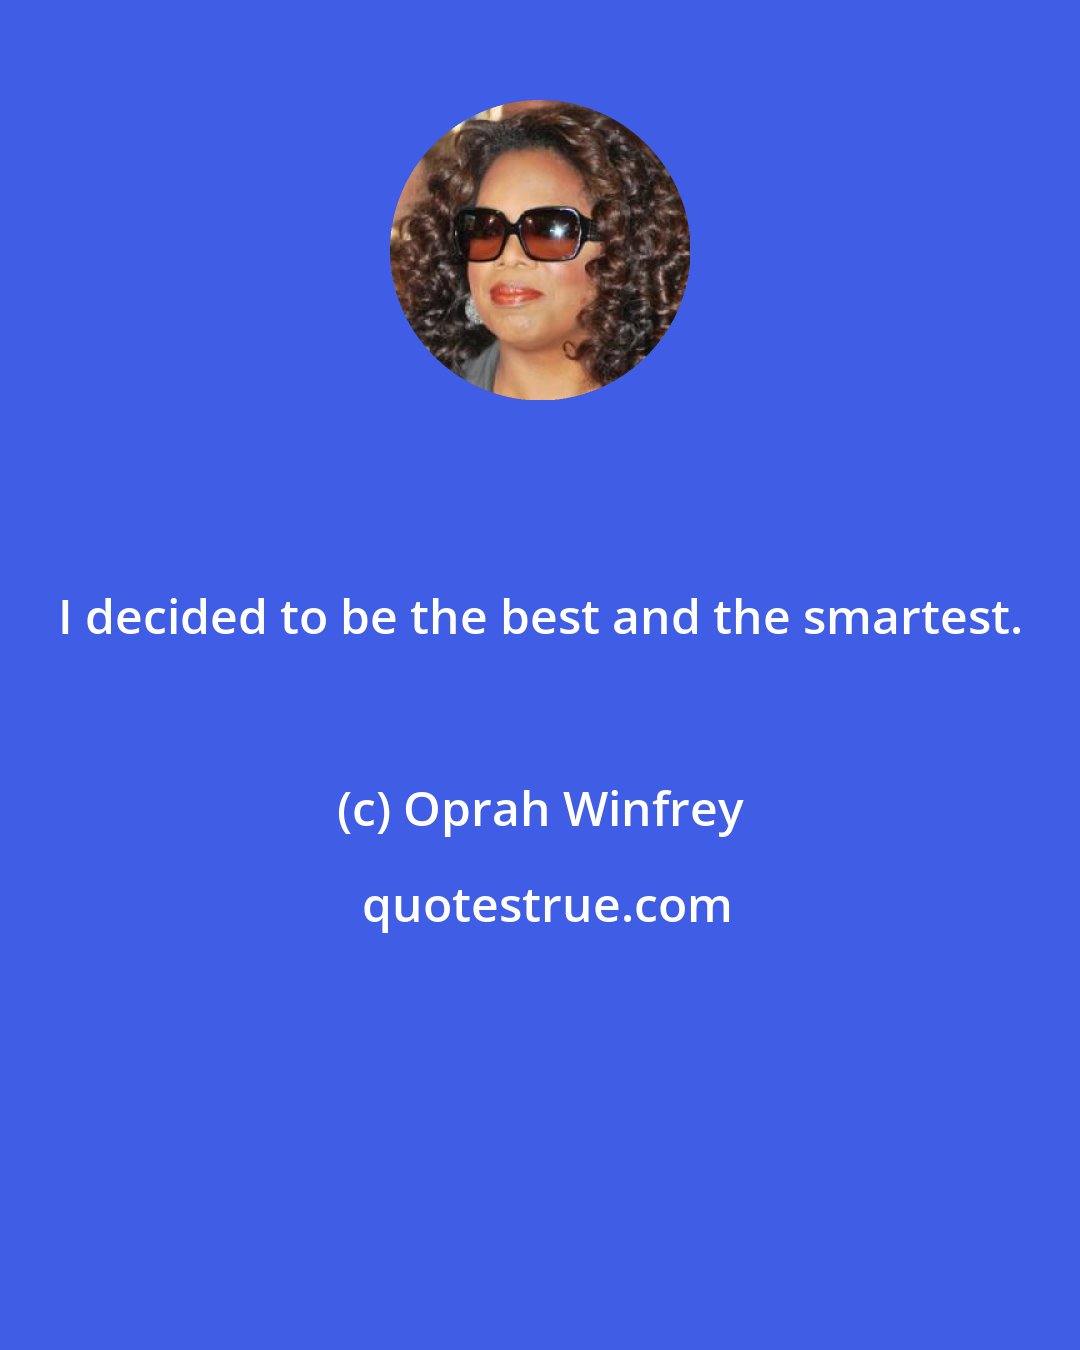 Oprah Winfrey: I decided to be the best and the smartest.